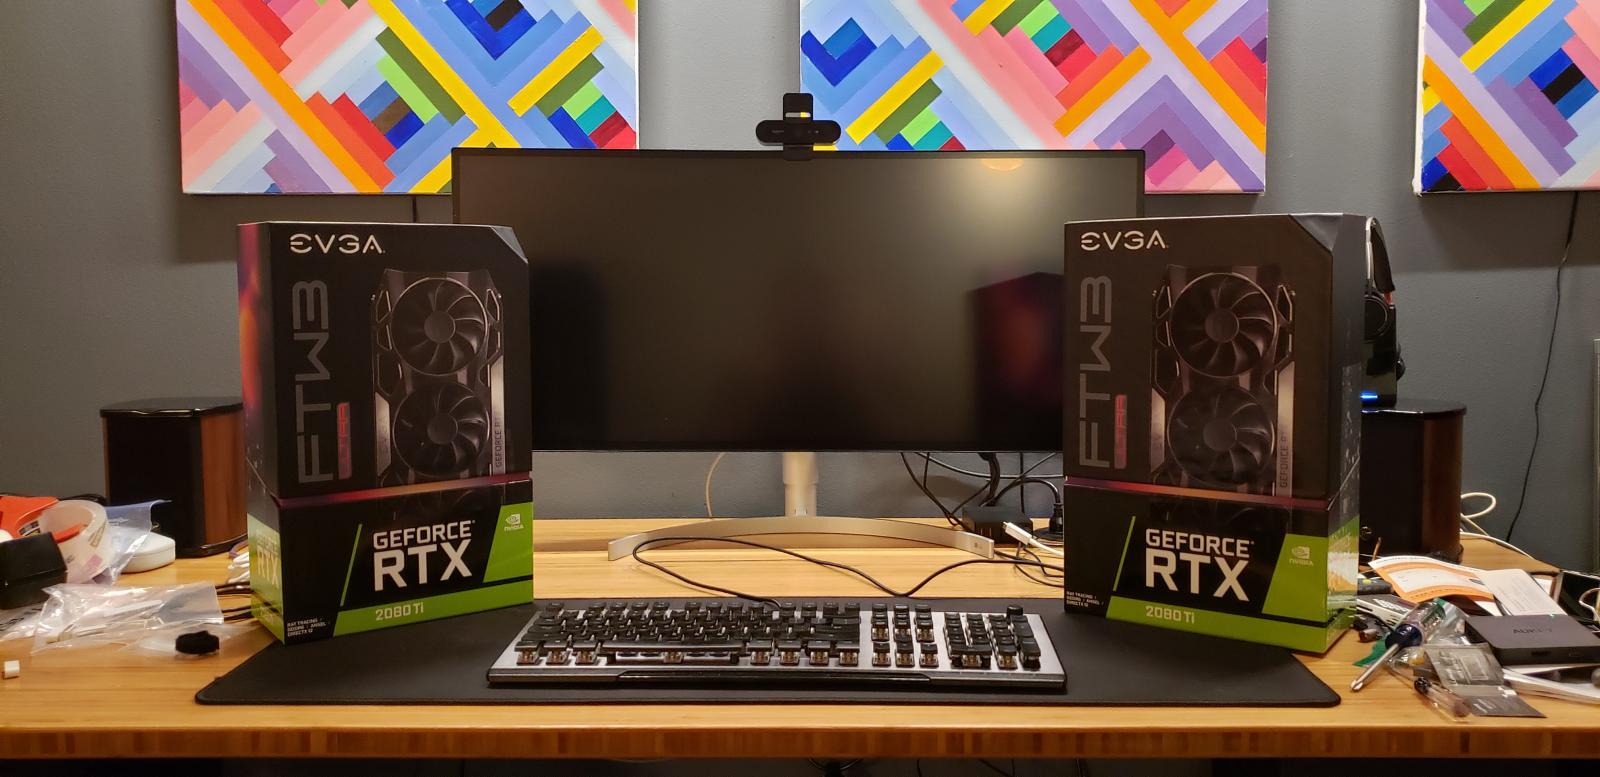 For sale Sealed, new-in-box EVGA RTX 2080 Ti FTW3 Ultra